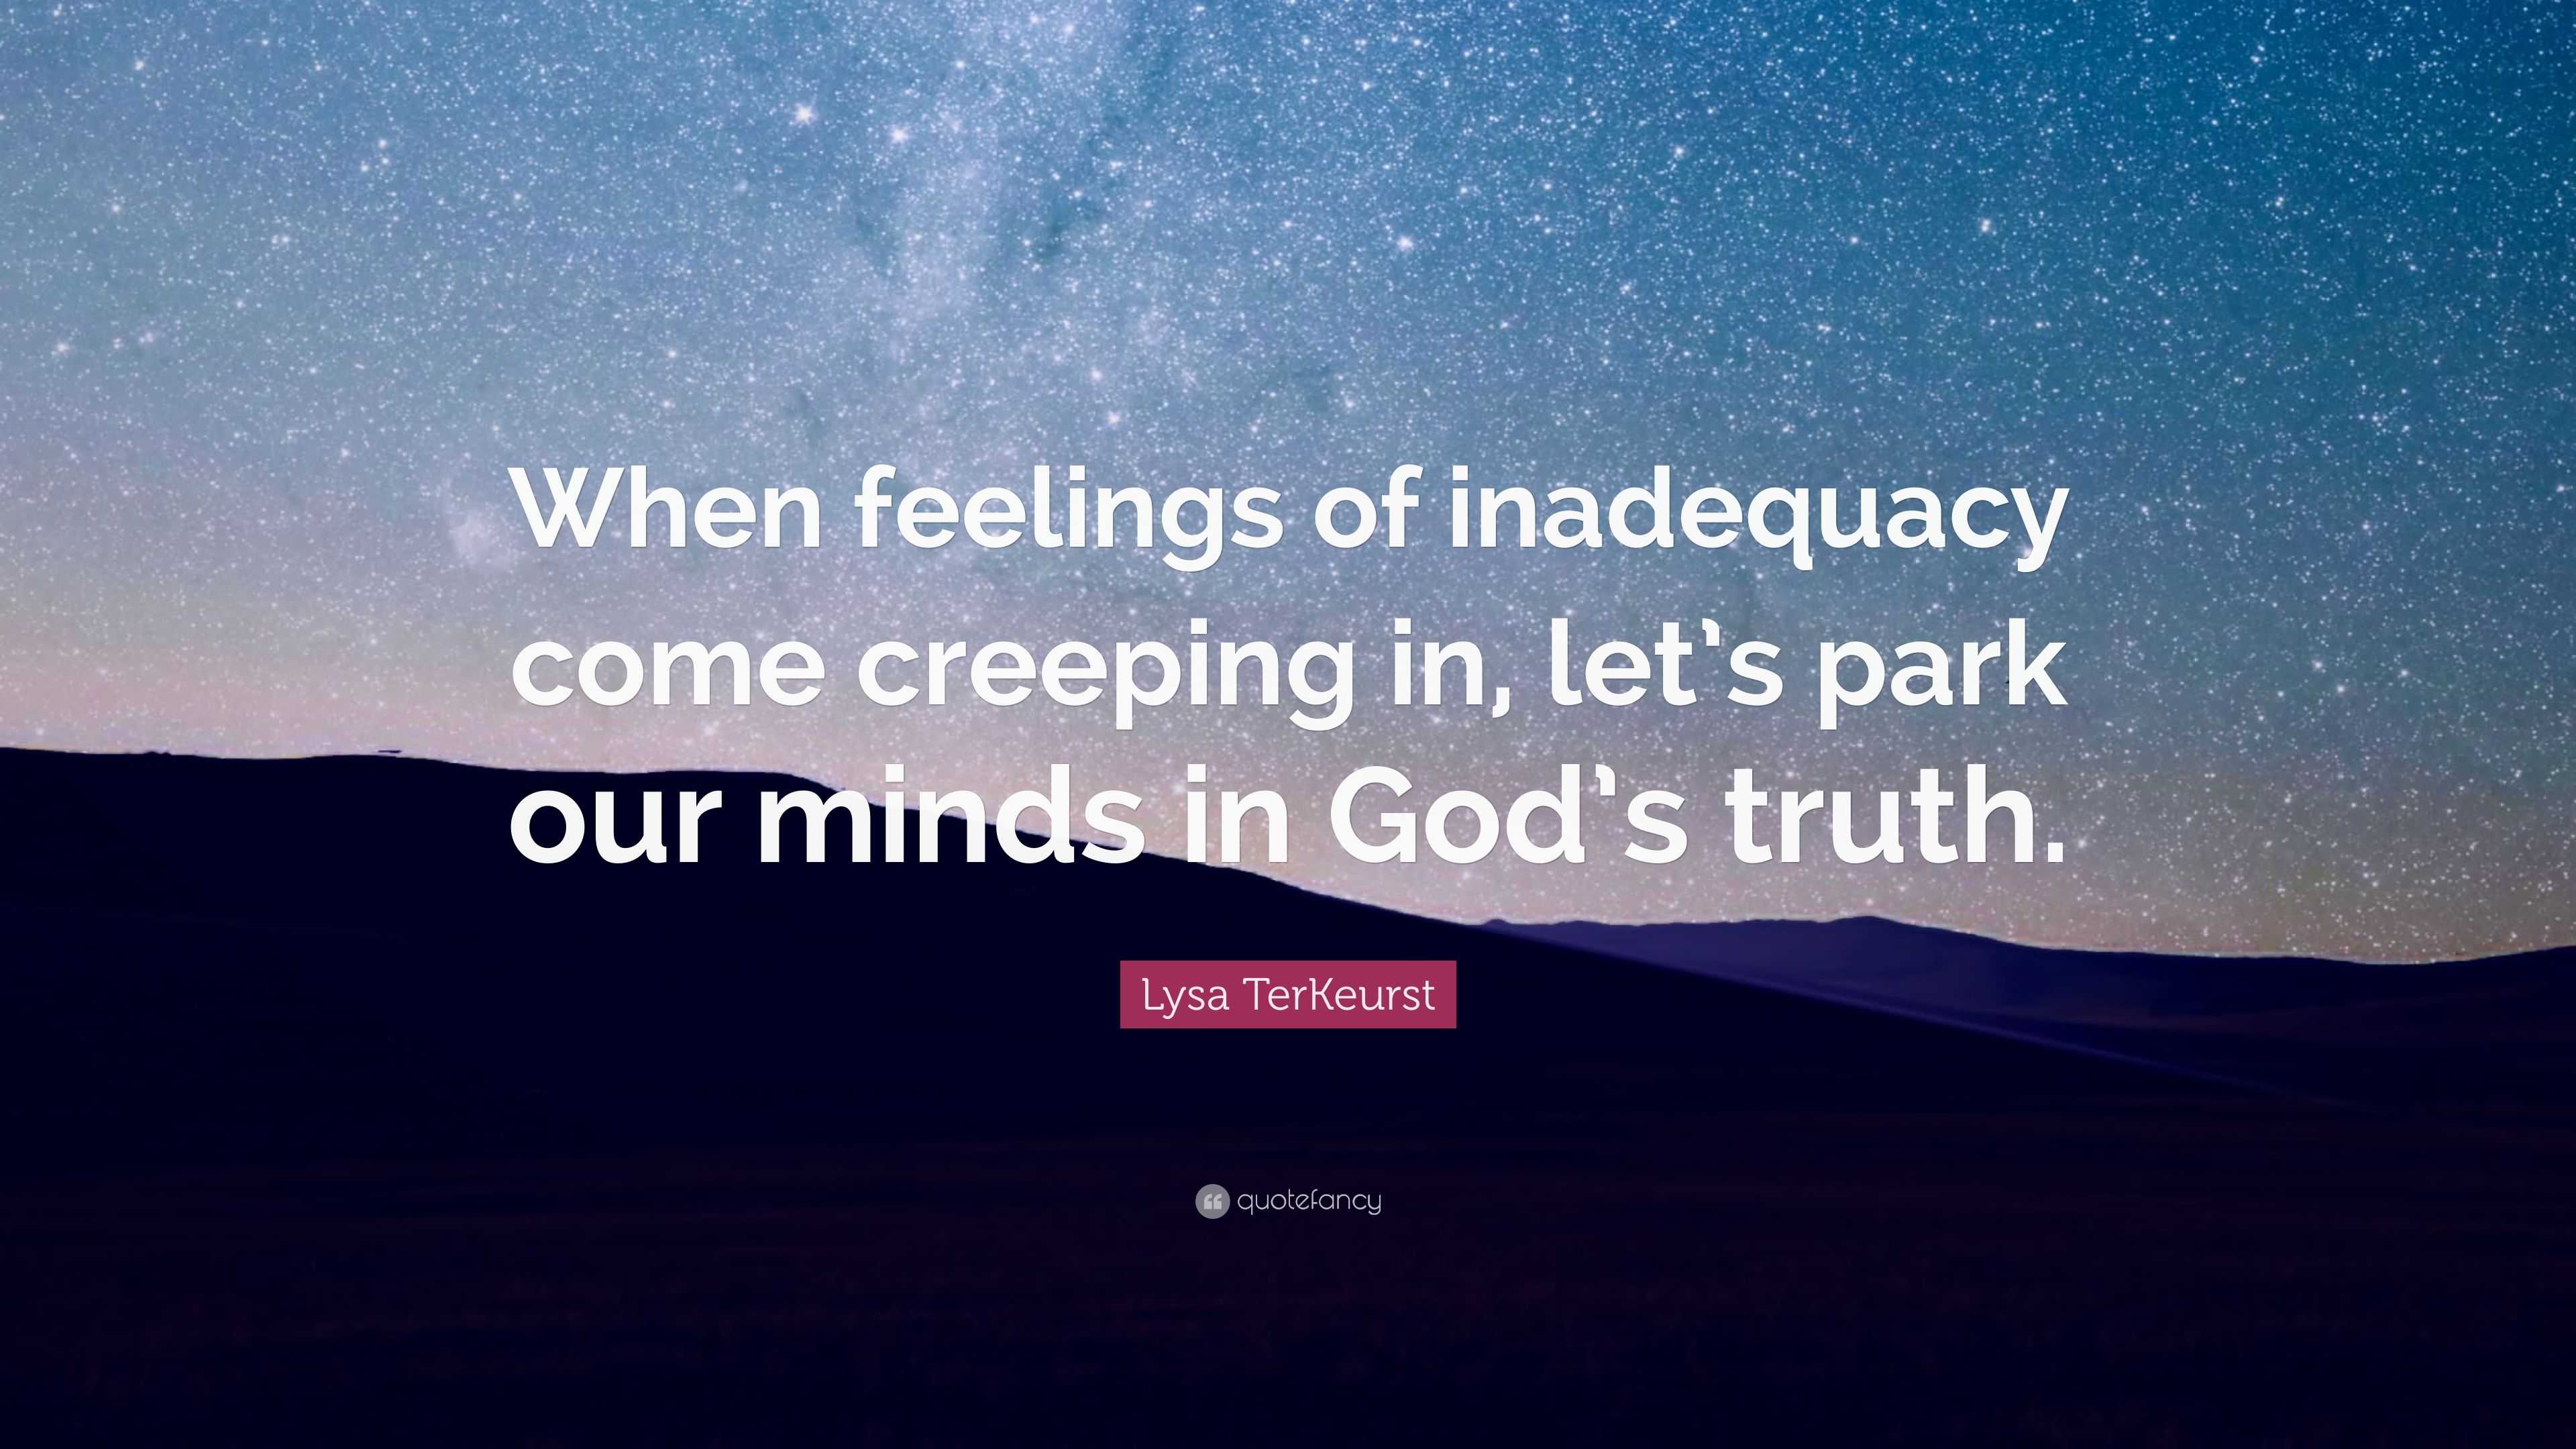 Lysa TerKeurst Quote: “When feelings of inadequacy come creeping in